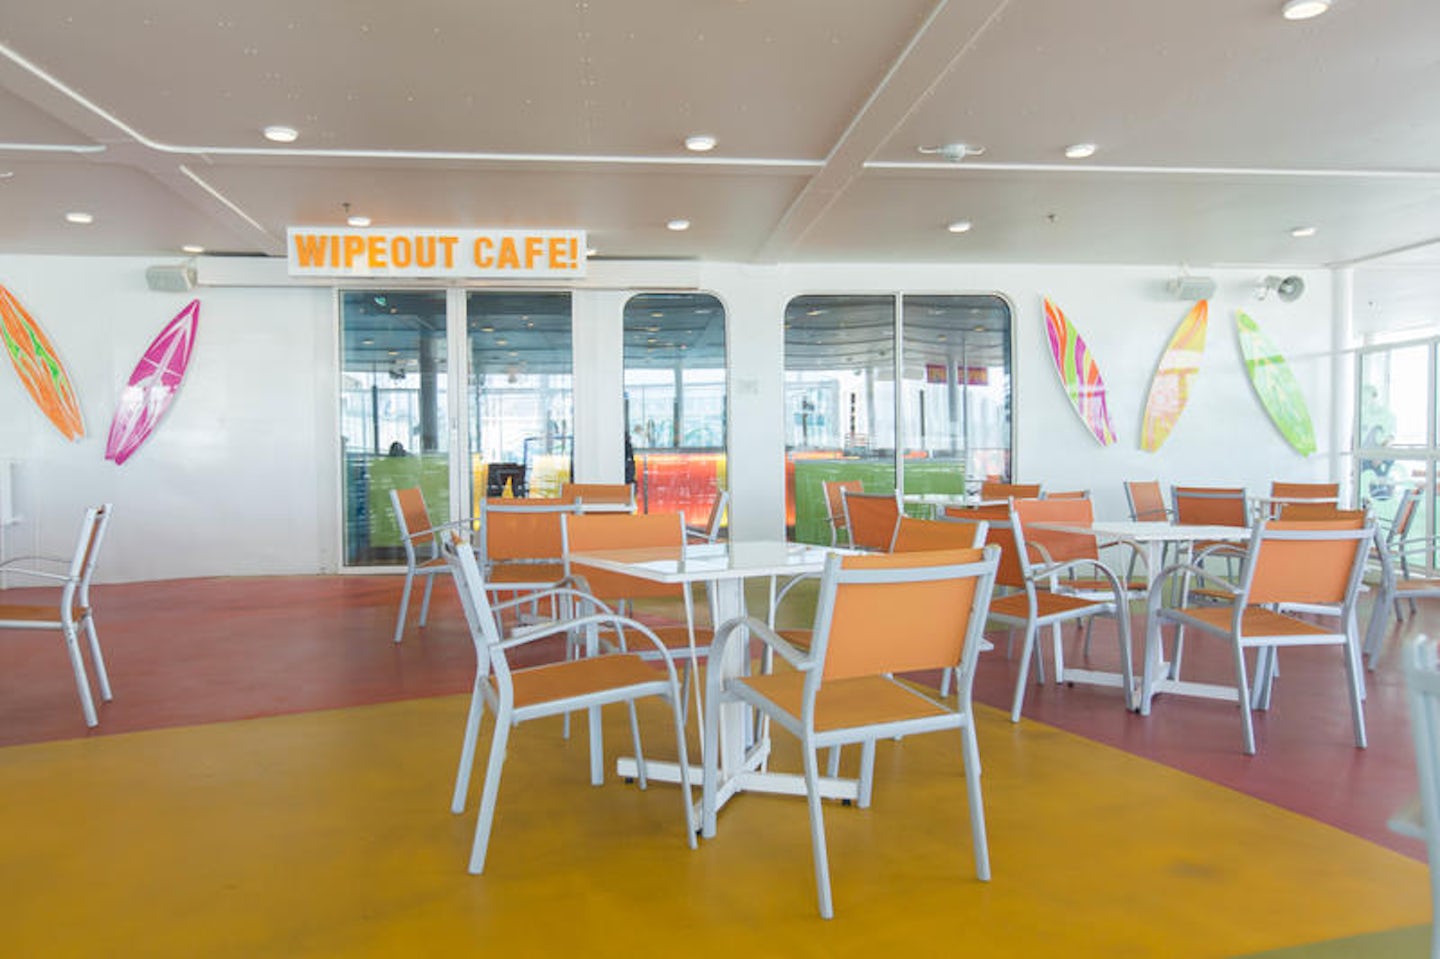 Wipeout Cafe on Allure of the Seas